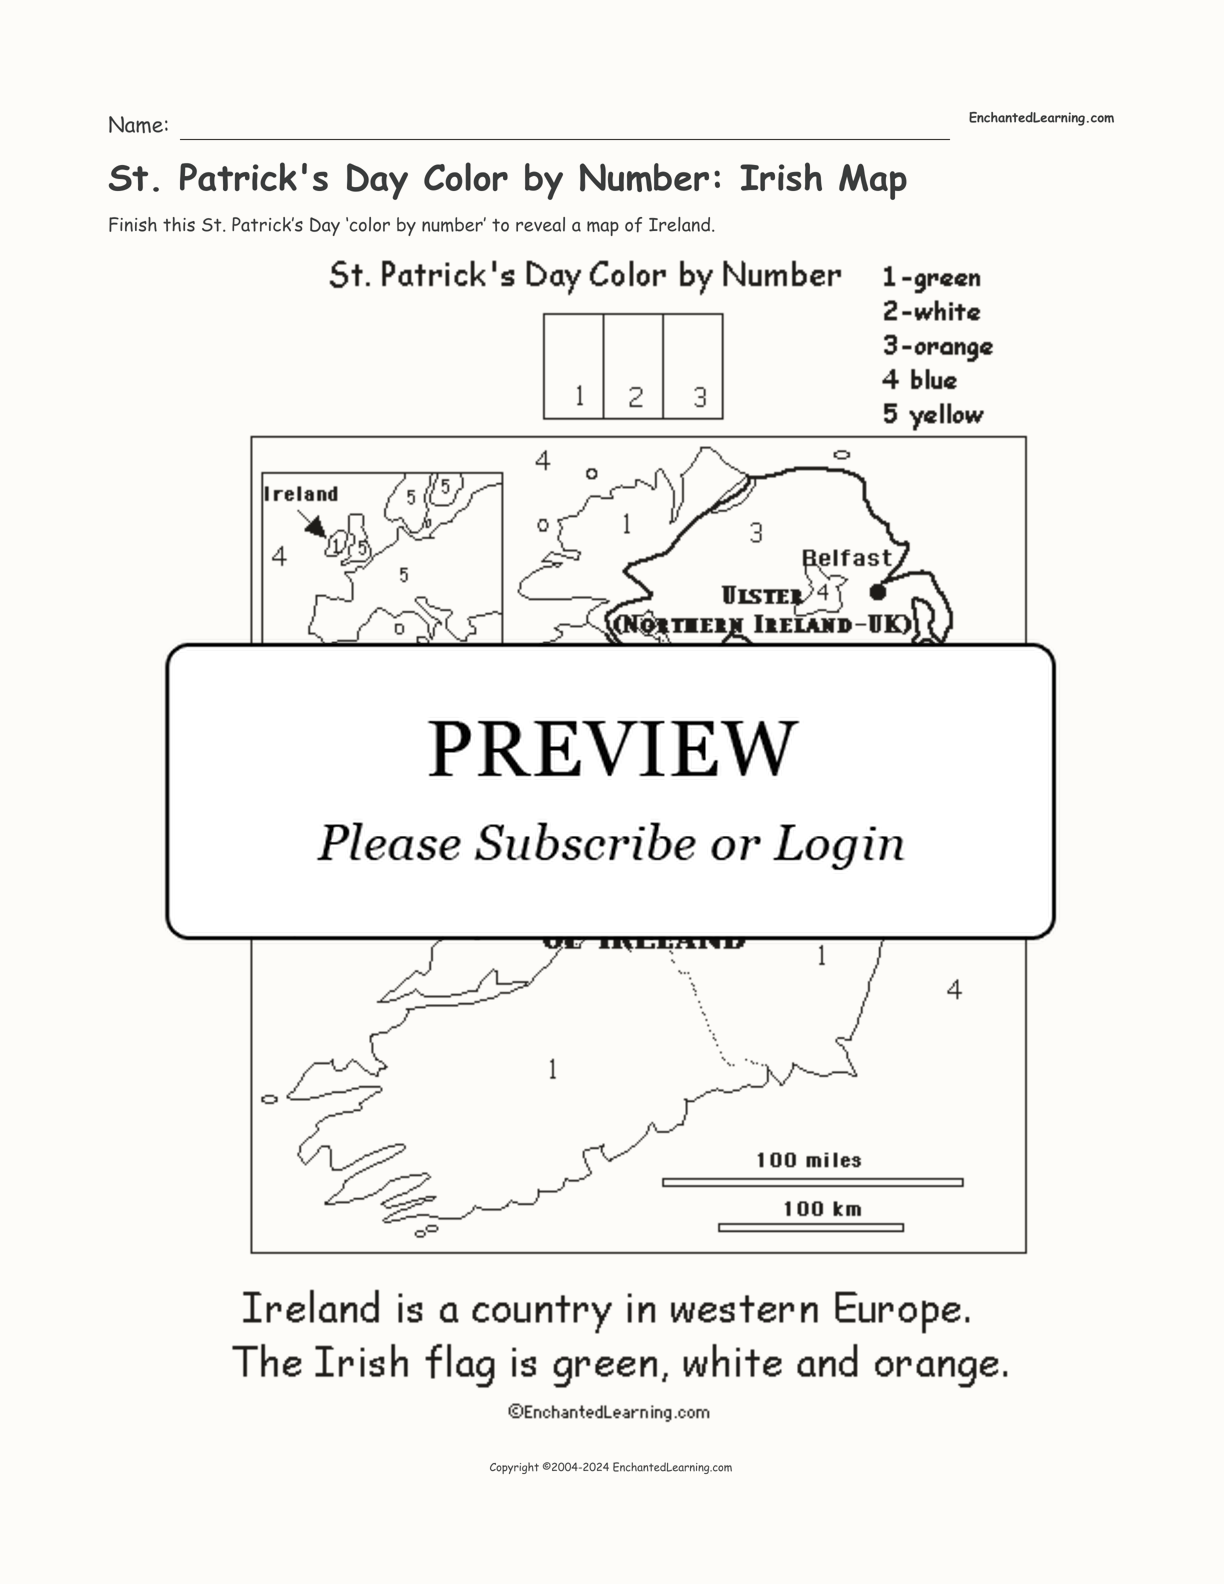 St. Patrick's Day Color by Number: Irish Map interactive printout page 1